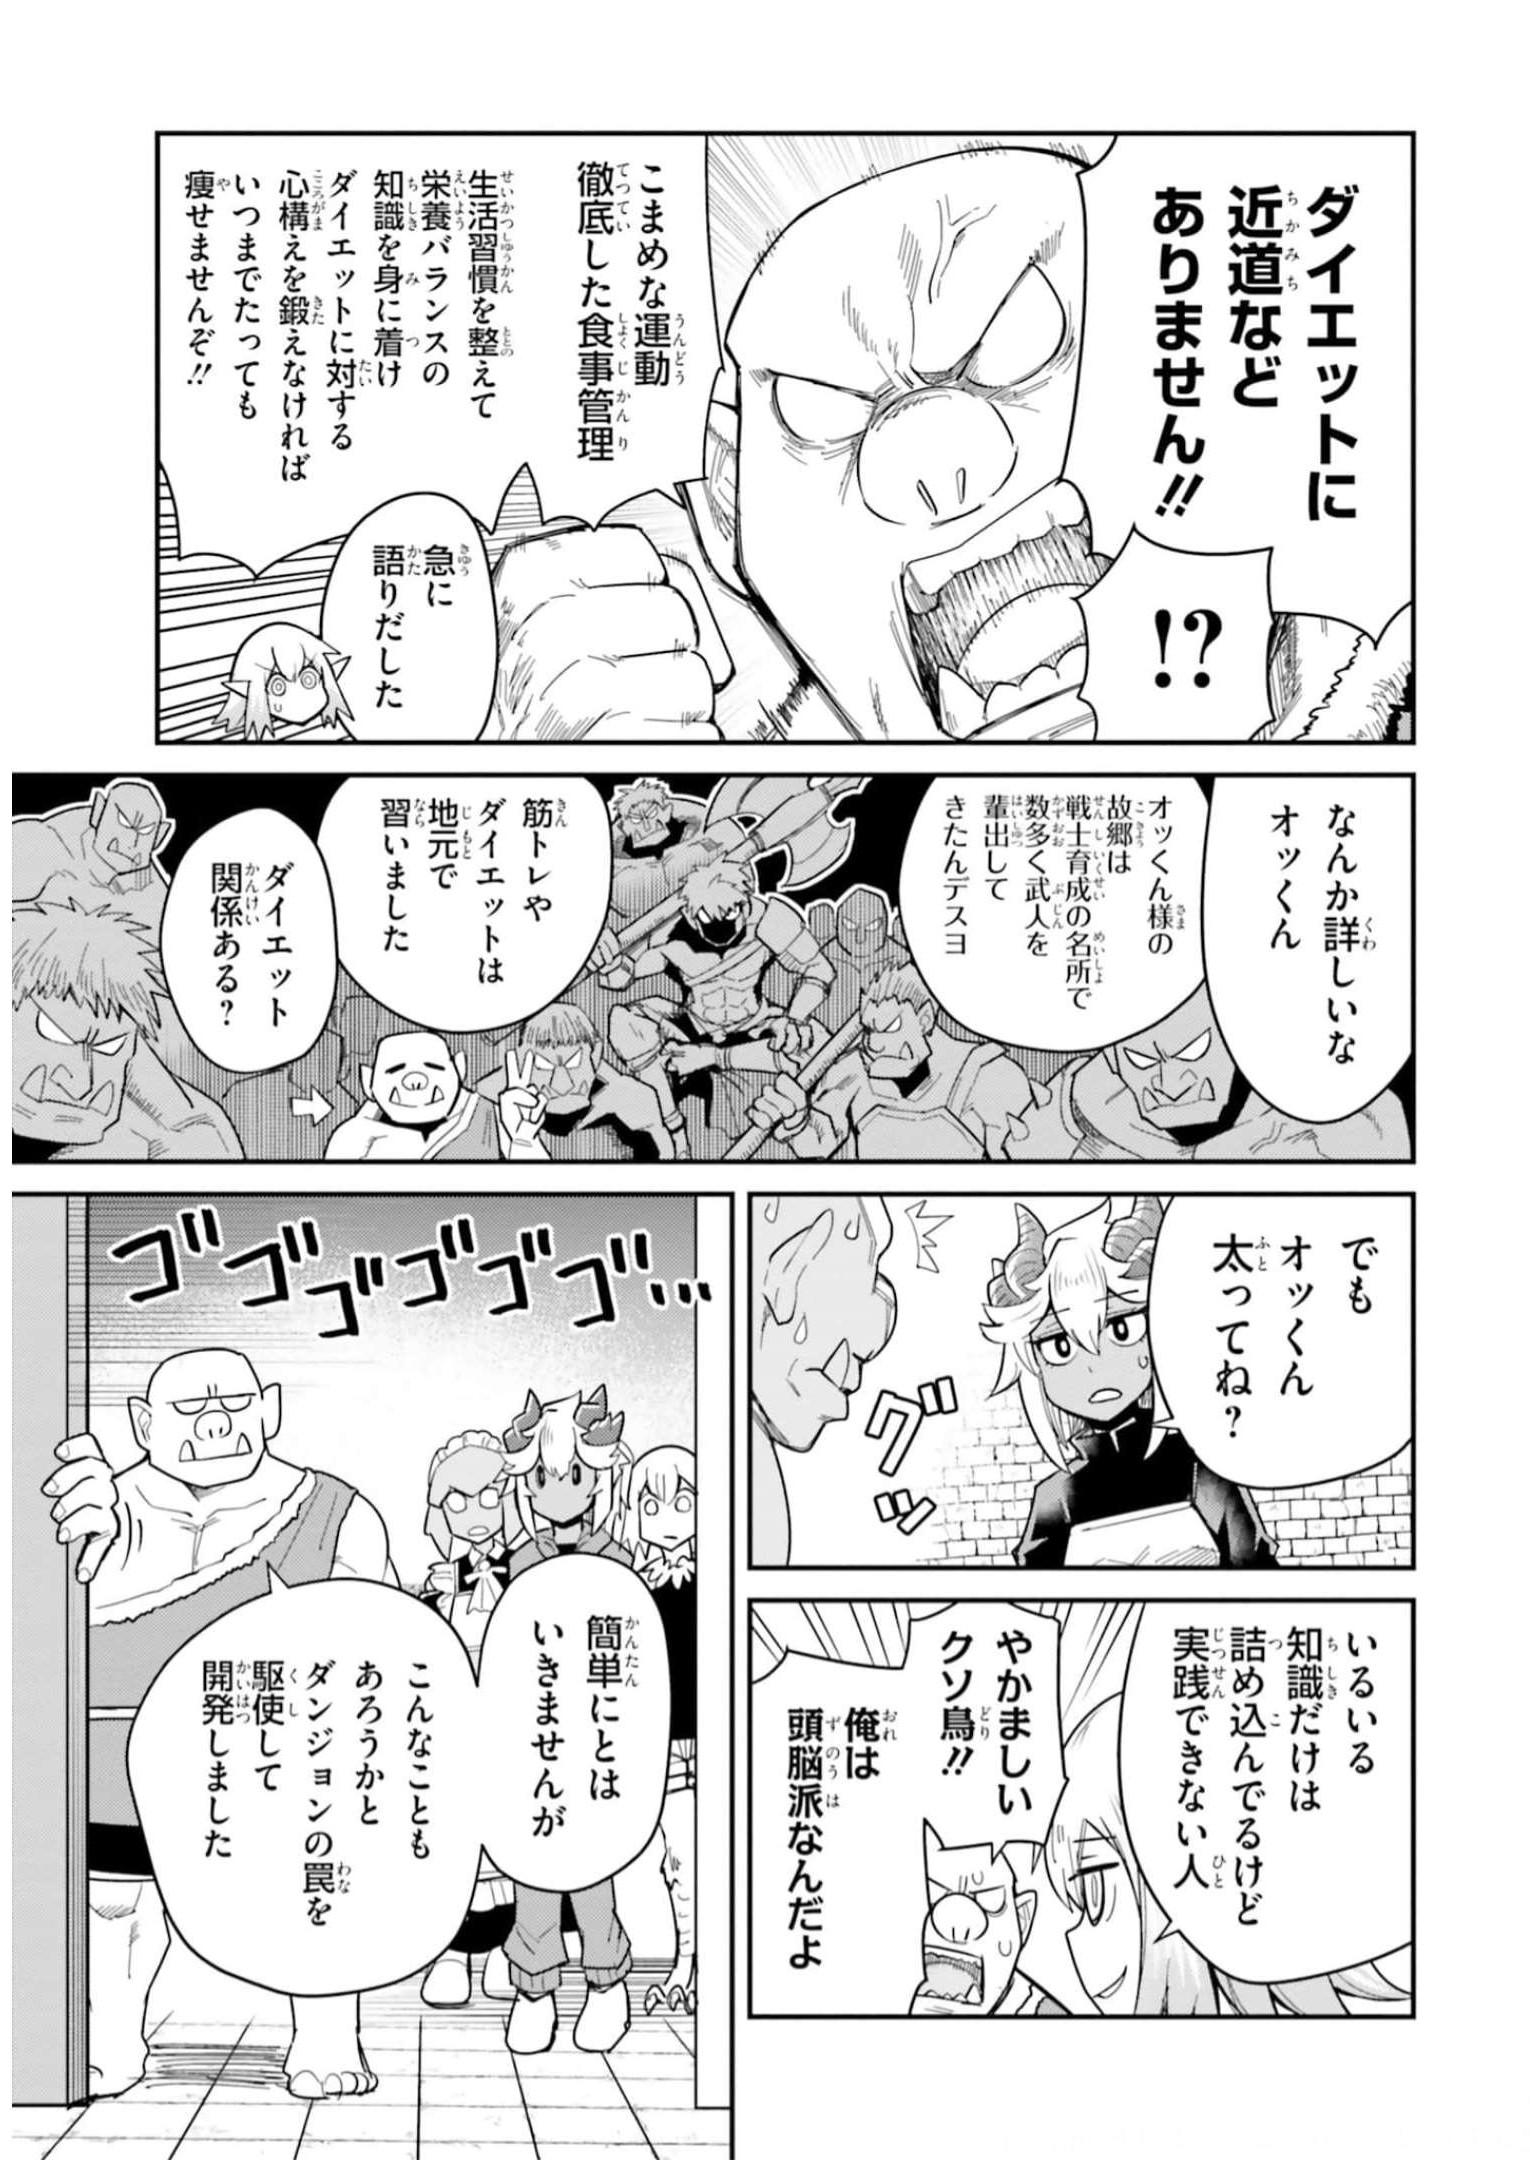 Dungeon Friends Forever Dungeon’s Childhood Friend ダンジョンの幼なじみ 第24話 - Page 7